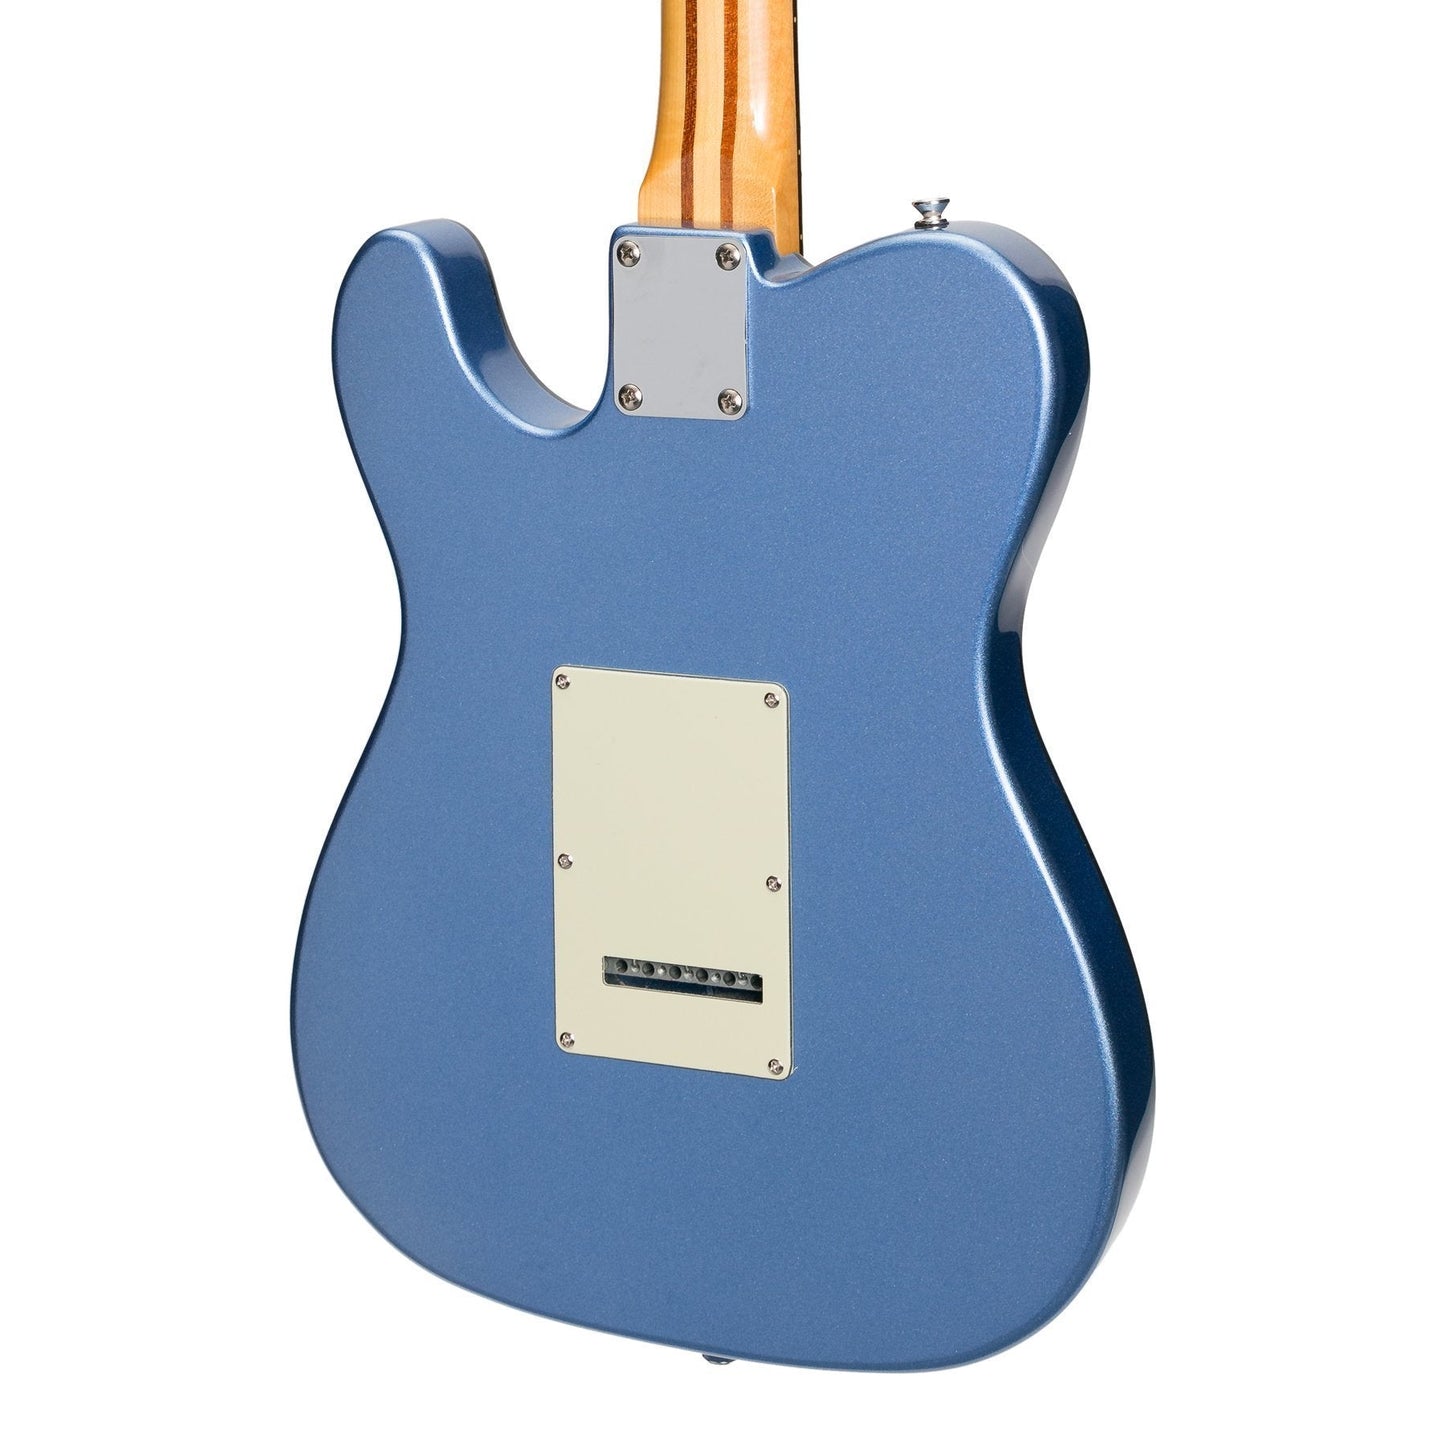 J&D Luthiers Deluxe TE-Style Electric Guitar (Metallic Blue)